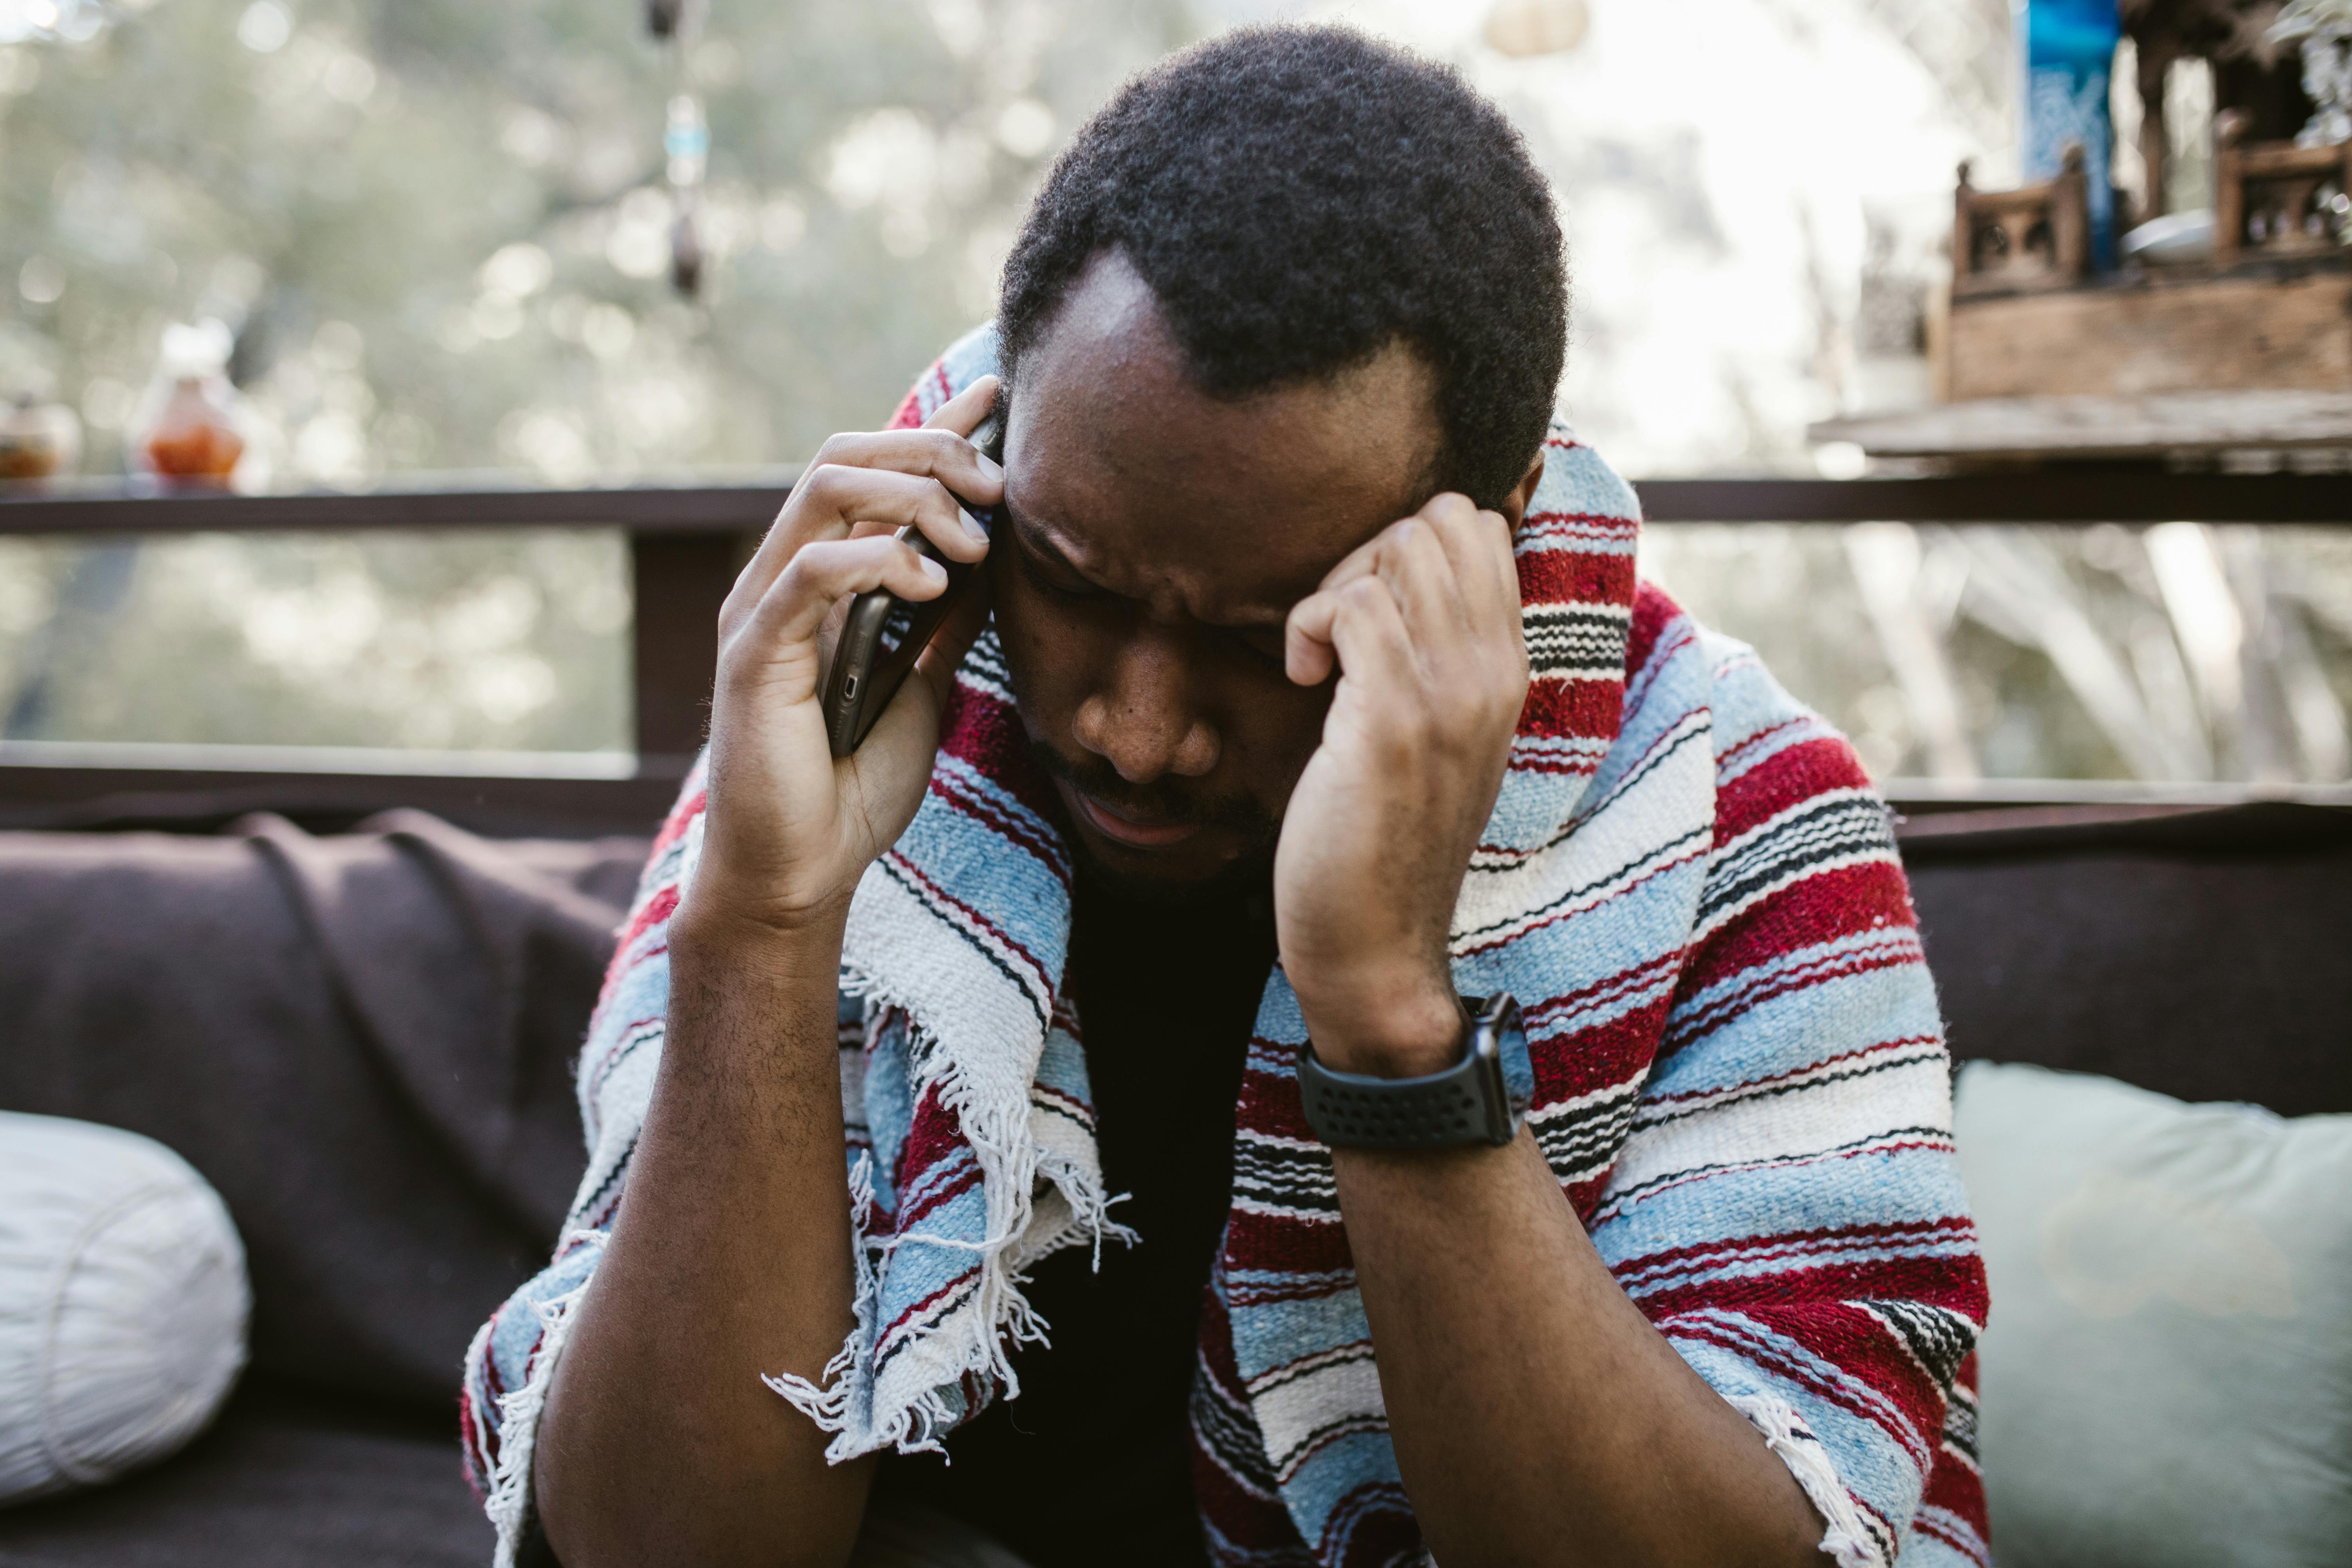 An upset man on the phone | Source: Pexels